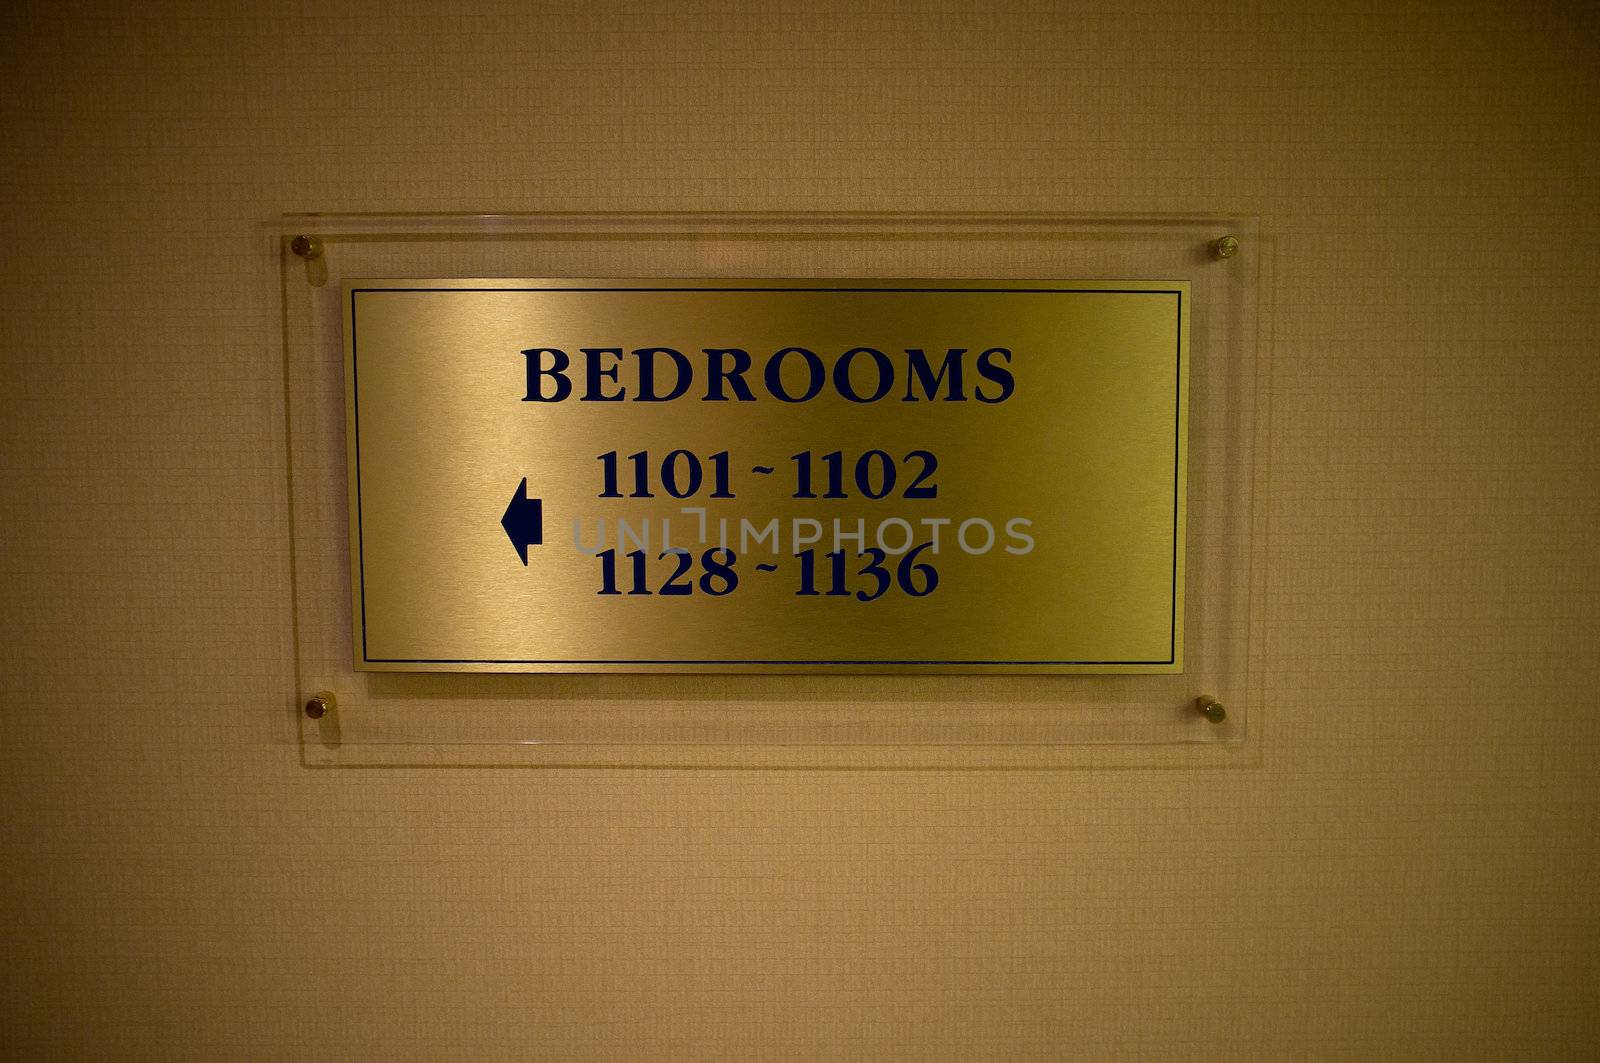 Board indicating direction to the bedrooms by stockyimages